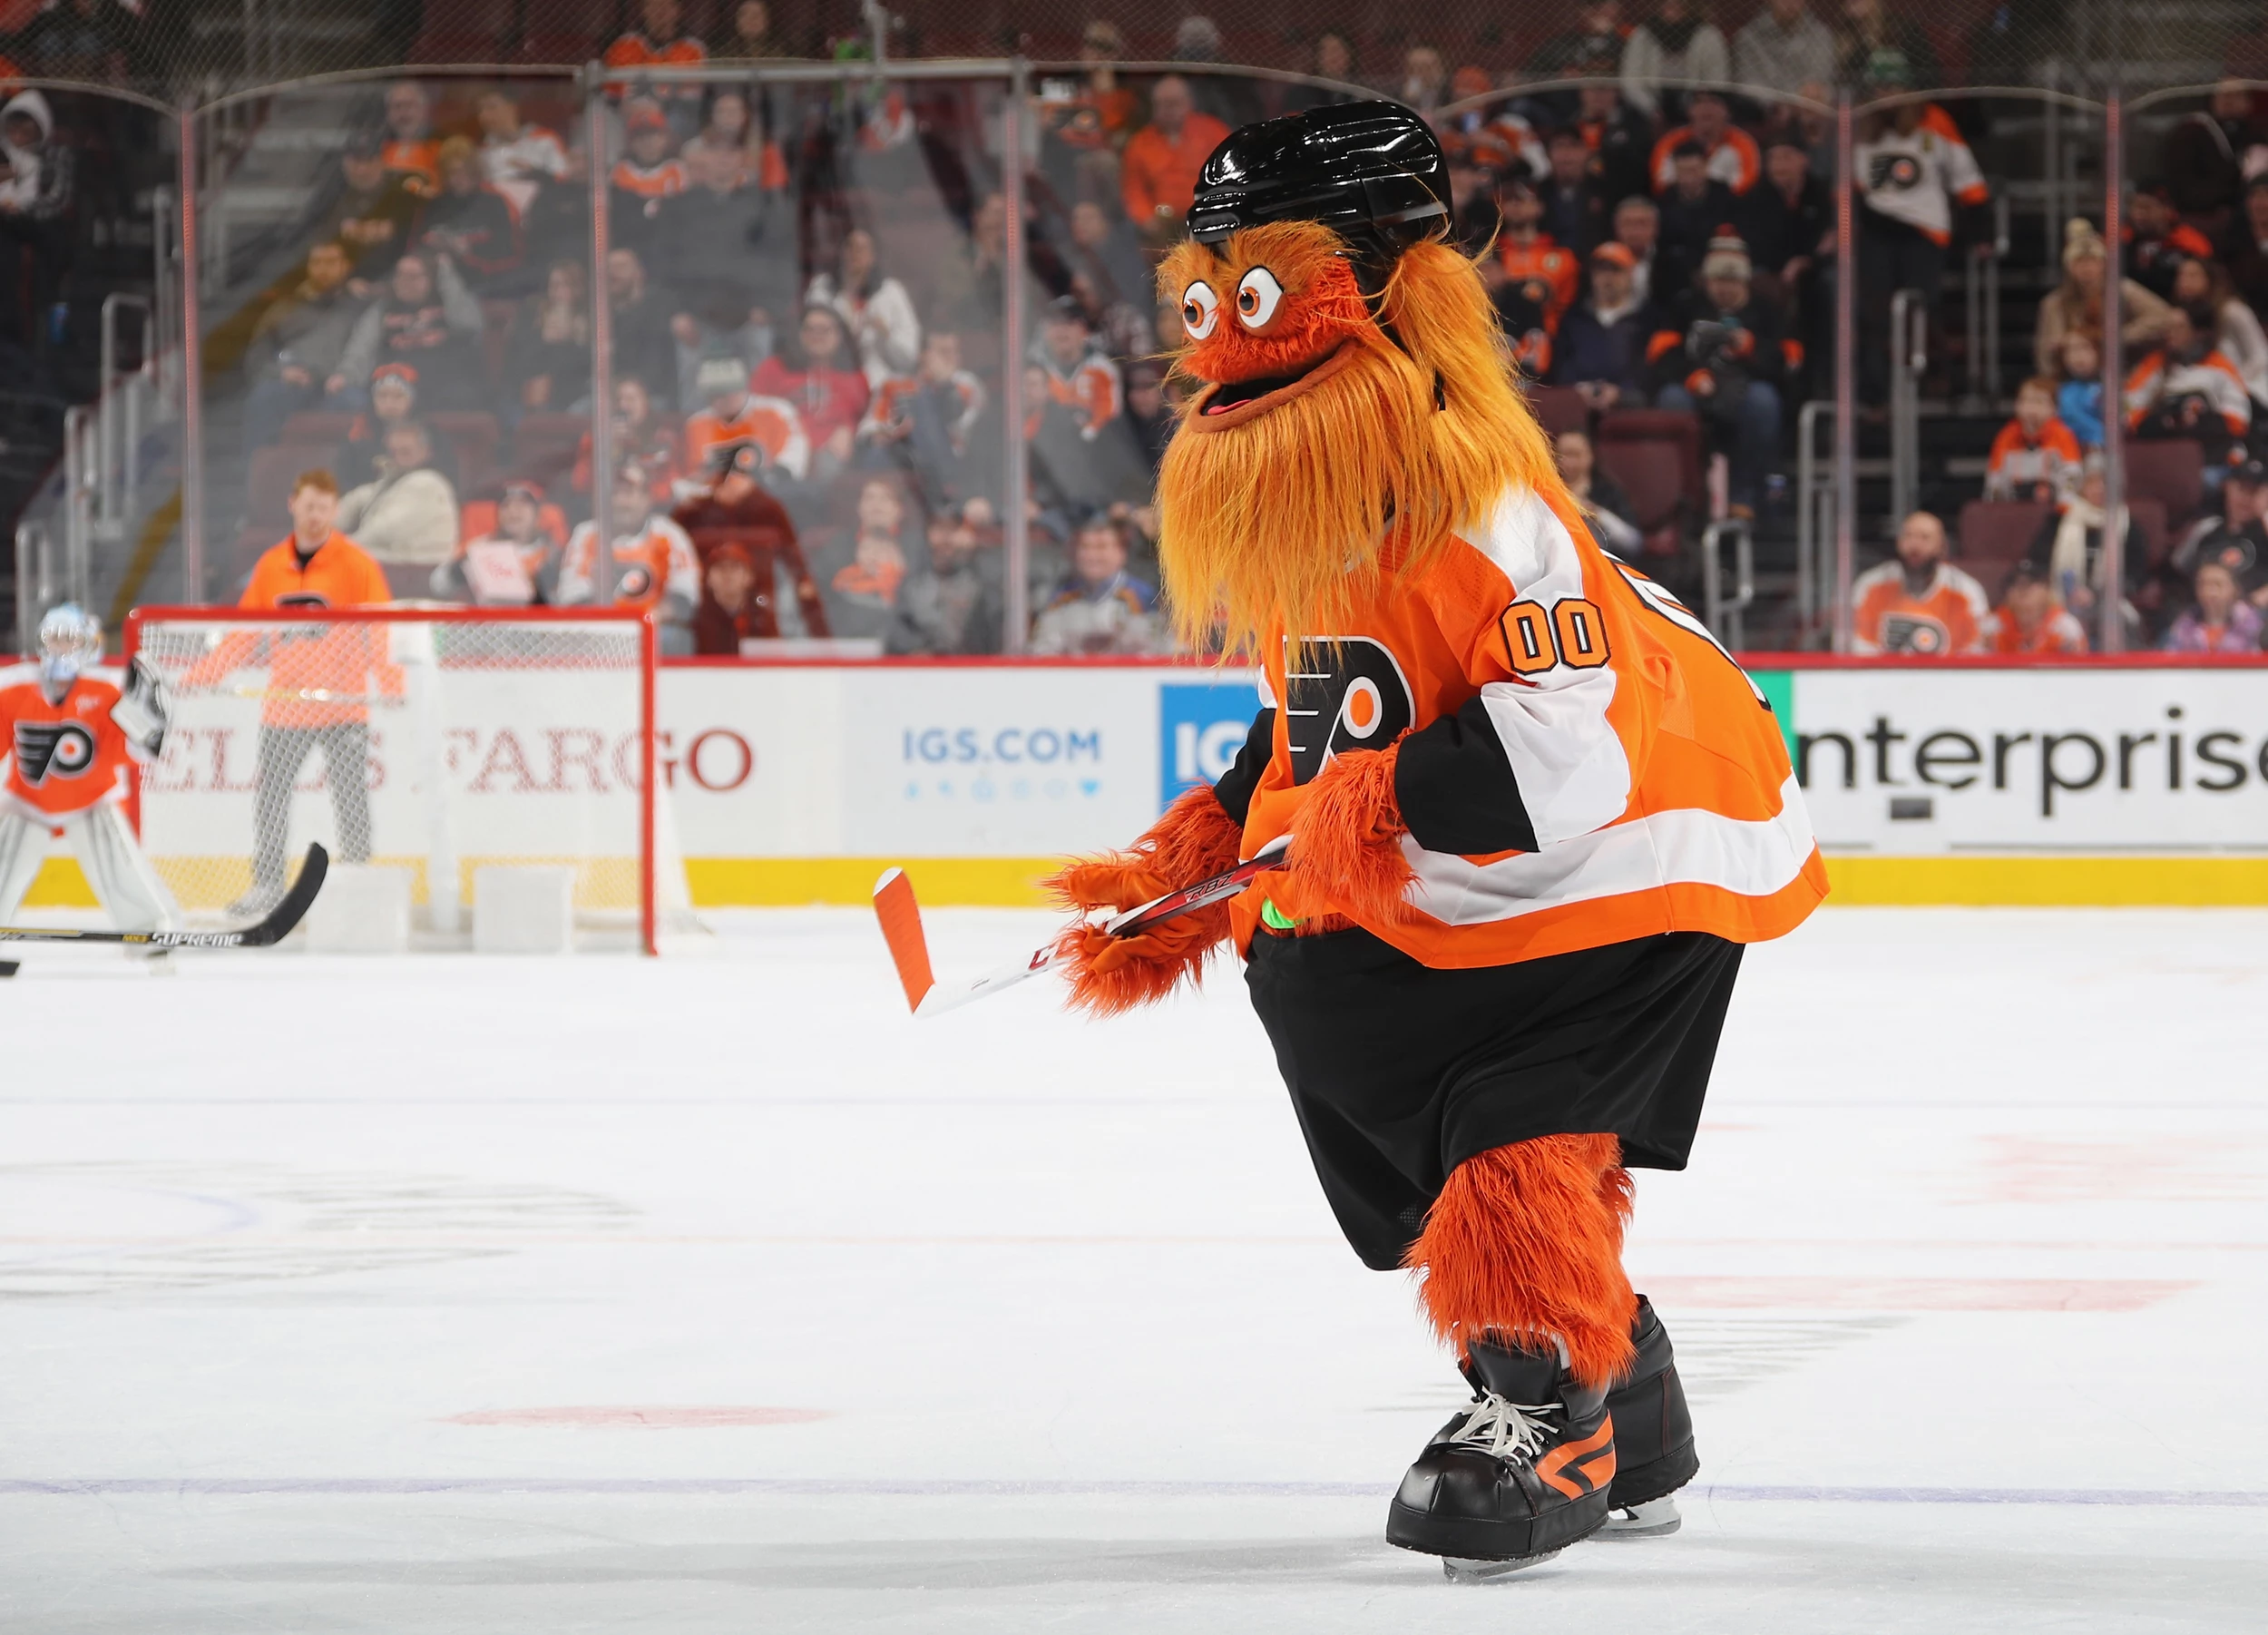 Gritty surprises 7-year-old superfan in the hospital